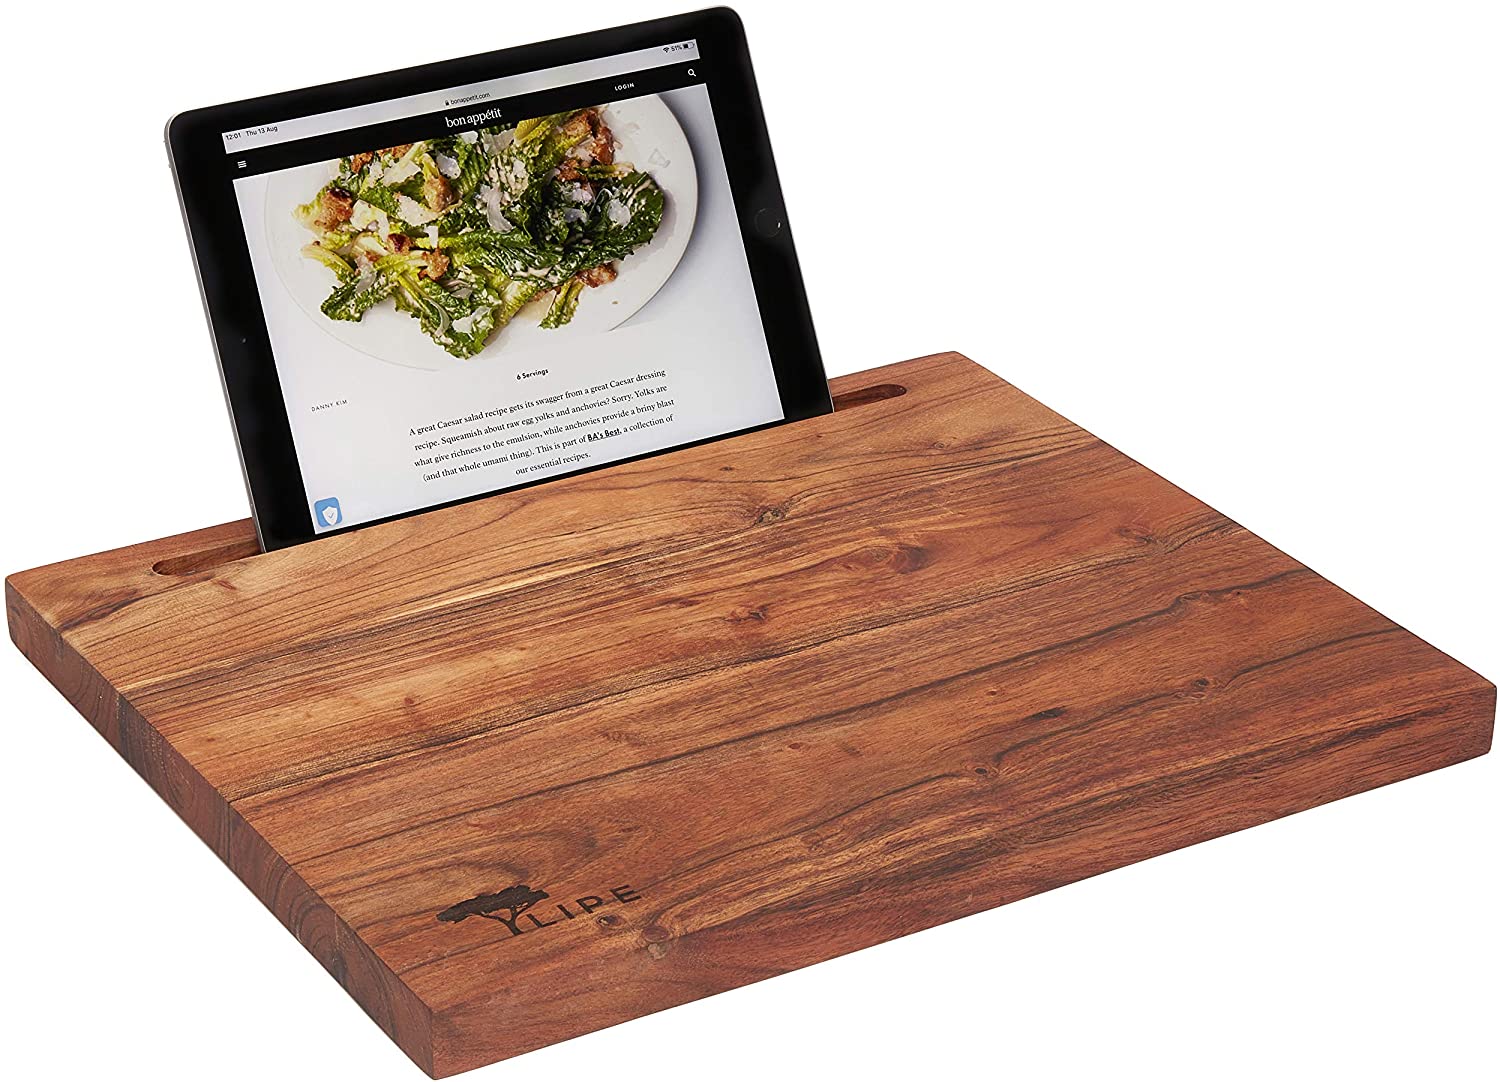 cutting-board-with-phone-holder with cash back rebate